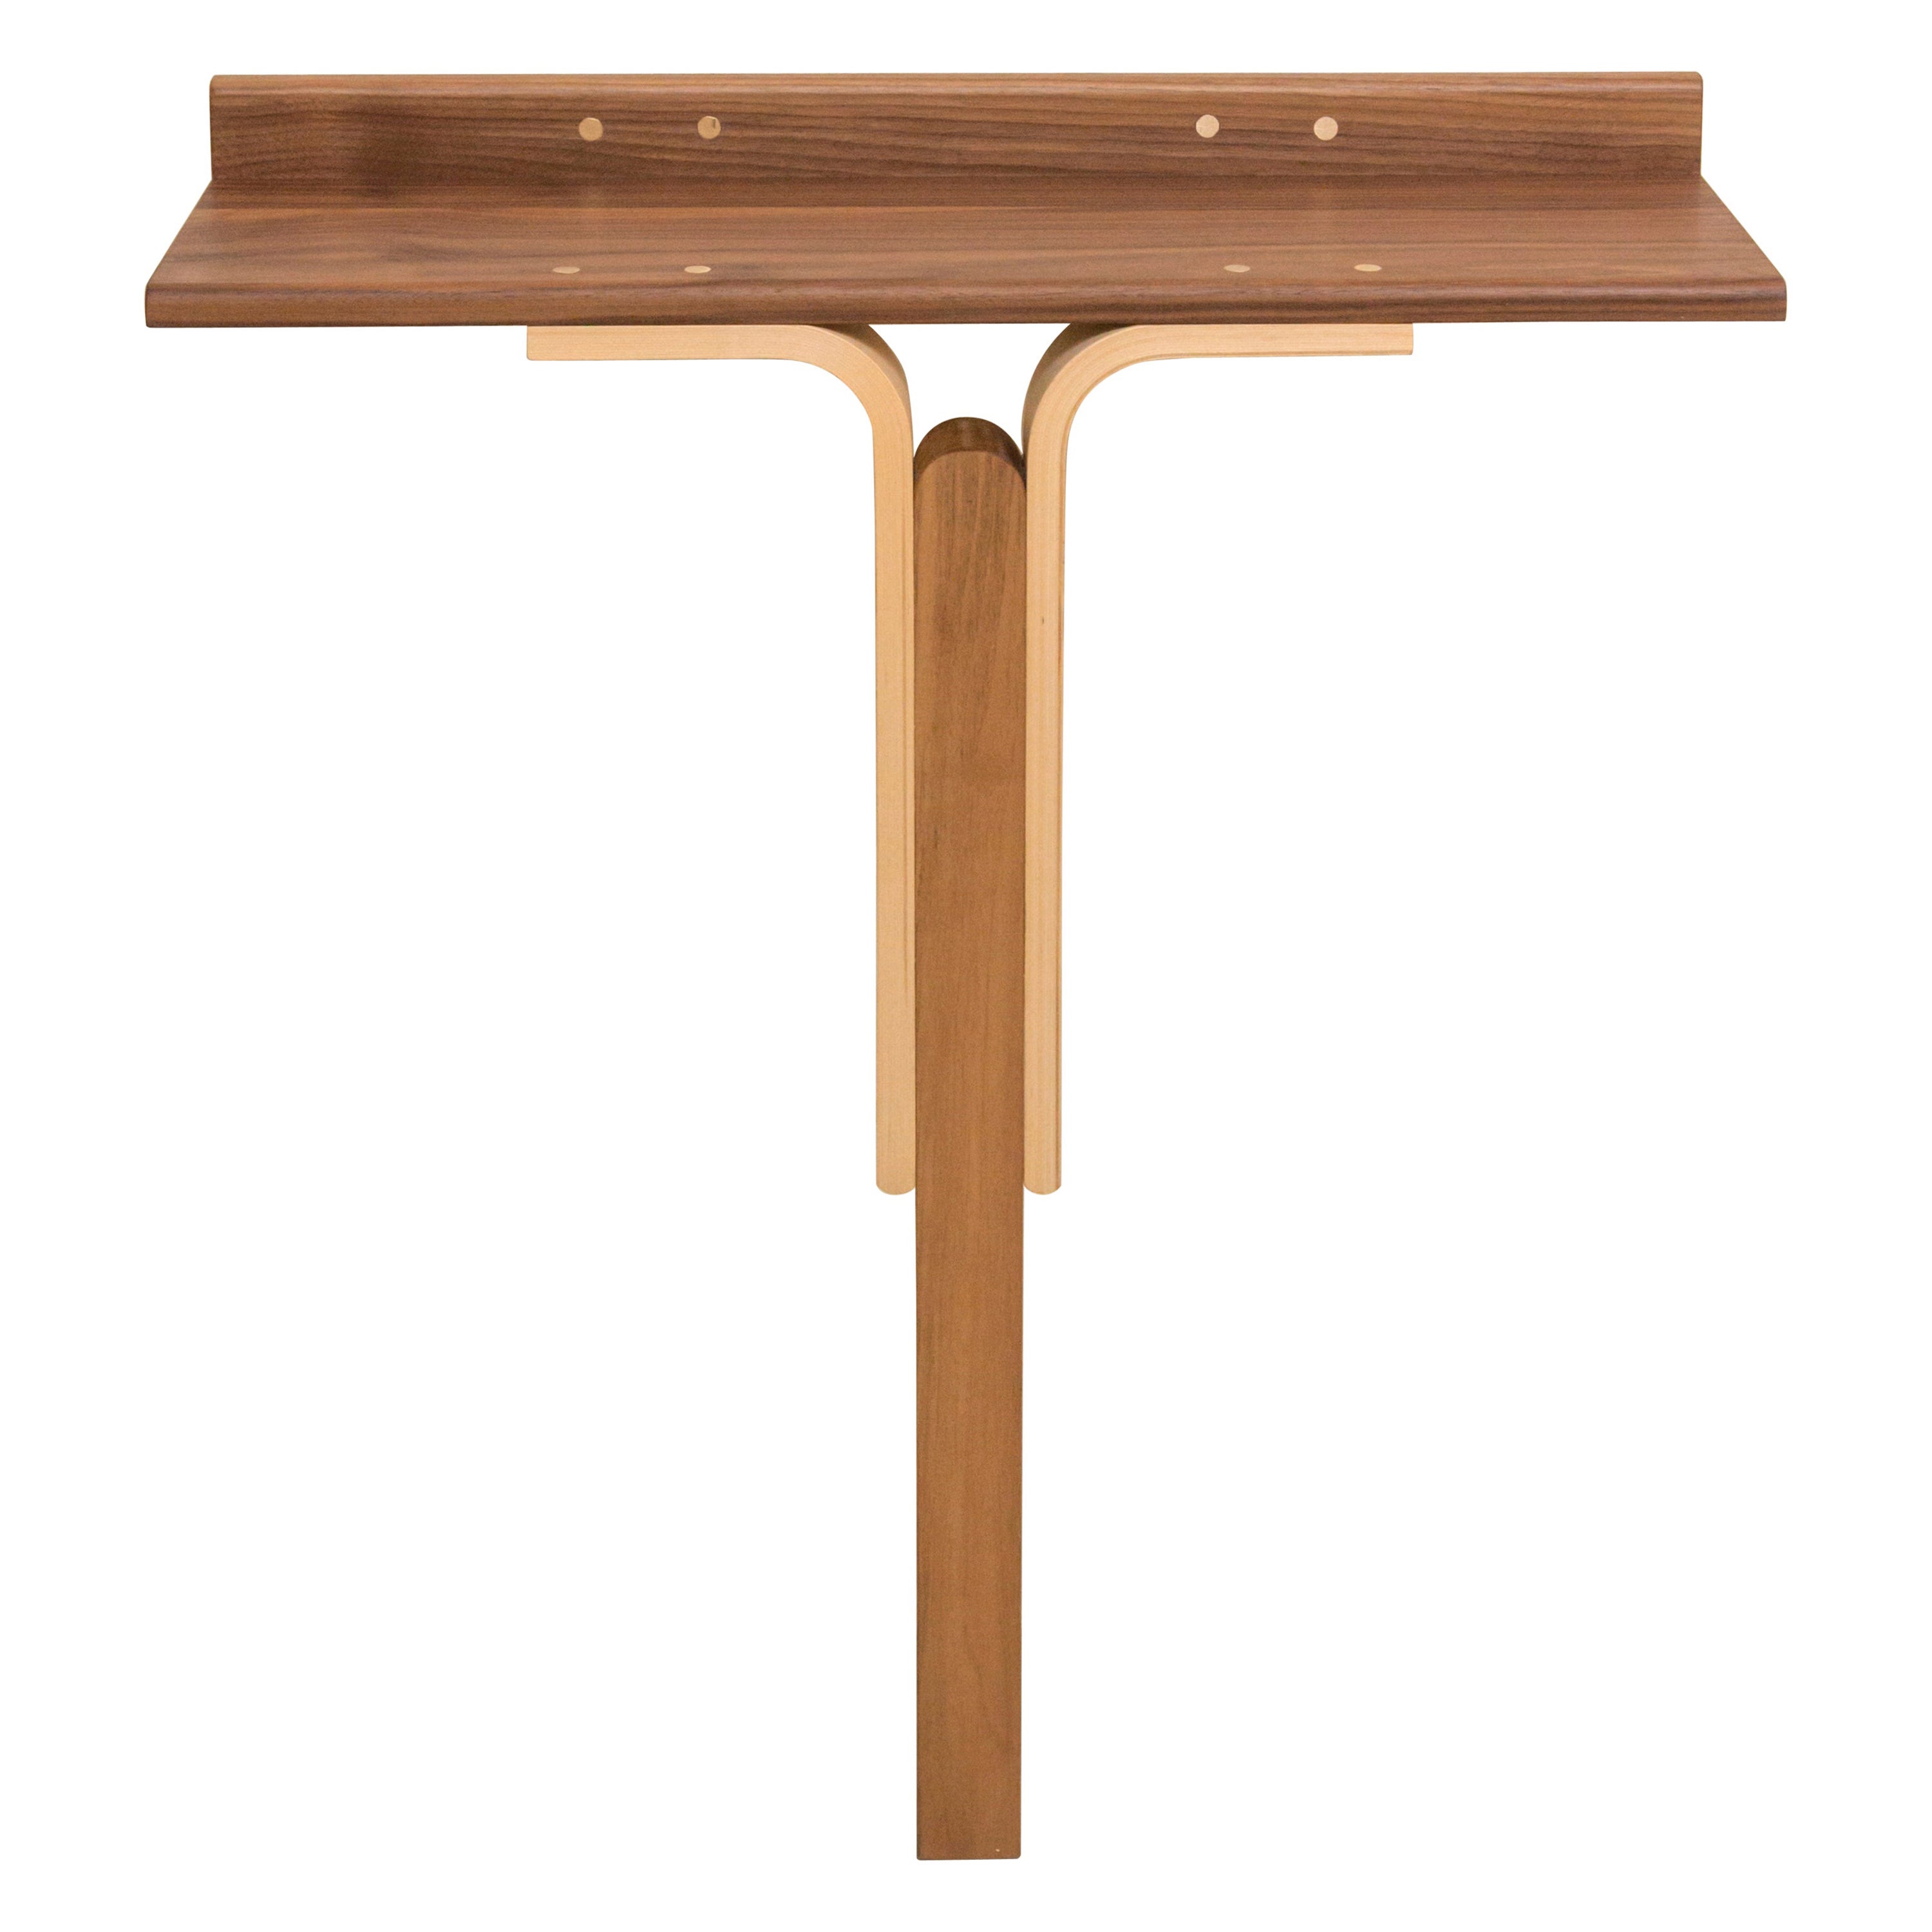 21st Century Contemporary Wood Console Table Handmade in Italy by Ilaria Bianchi For Sale